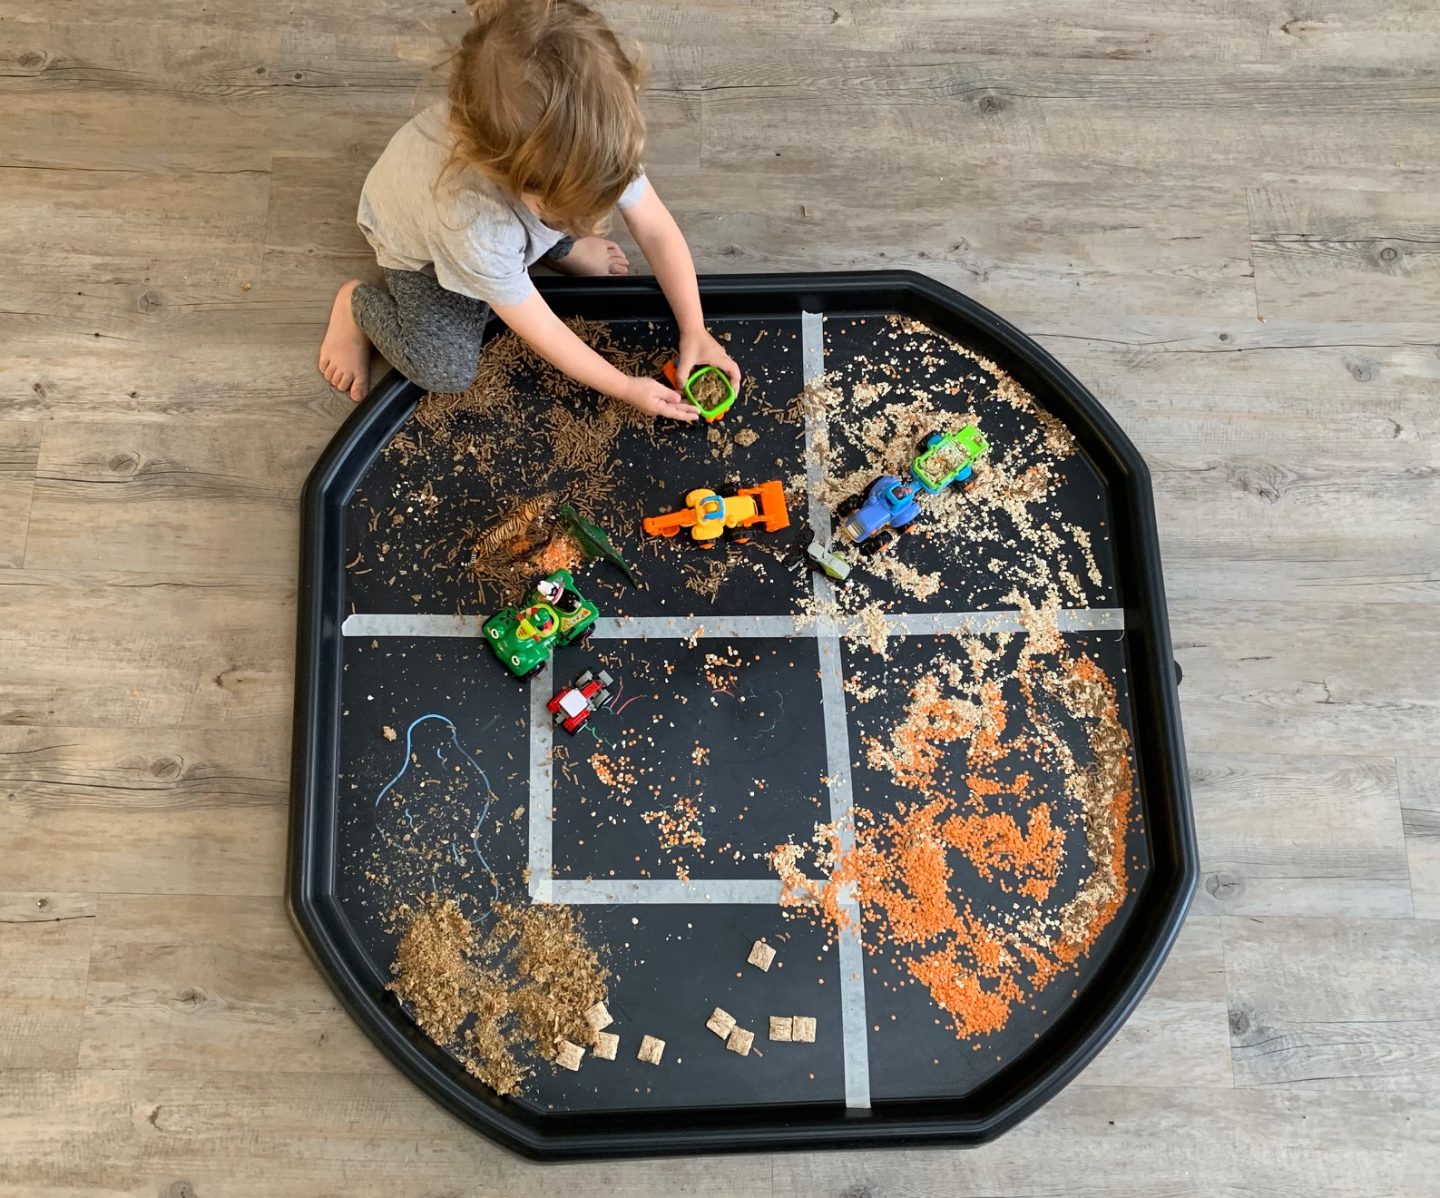 Simple tuff tray ideas for busy parents. Create a small farm play station with household ingredients, perfect for construction sites or farmyard fun.